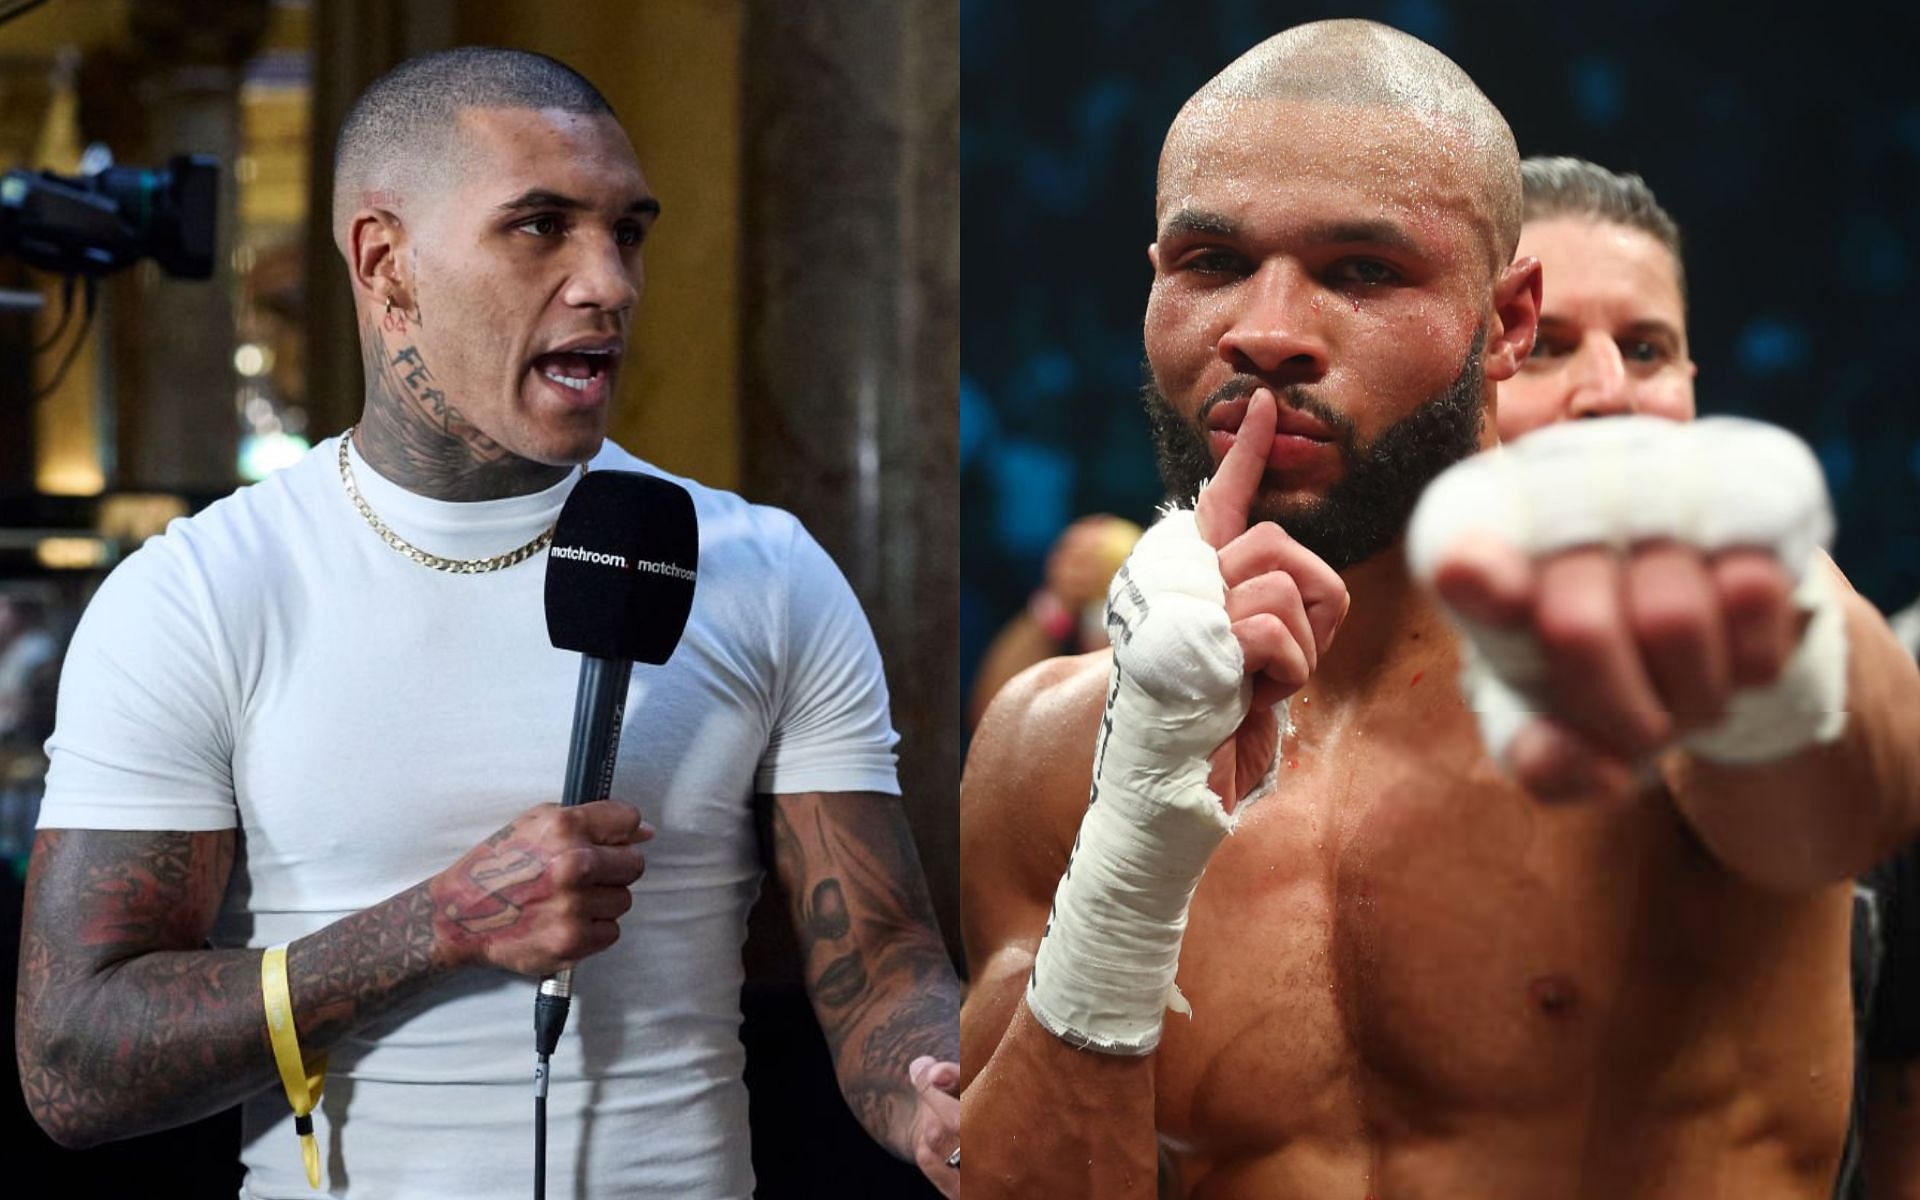 Conor Benn (left) and Chris Eubank Jr. (right) [Images Courtesy: @GettyImages]